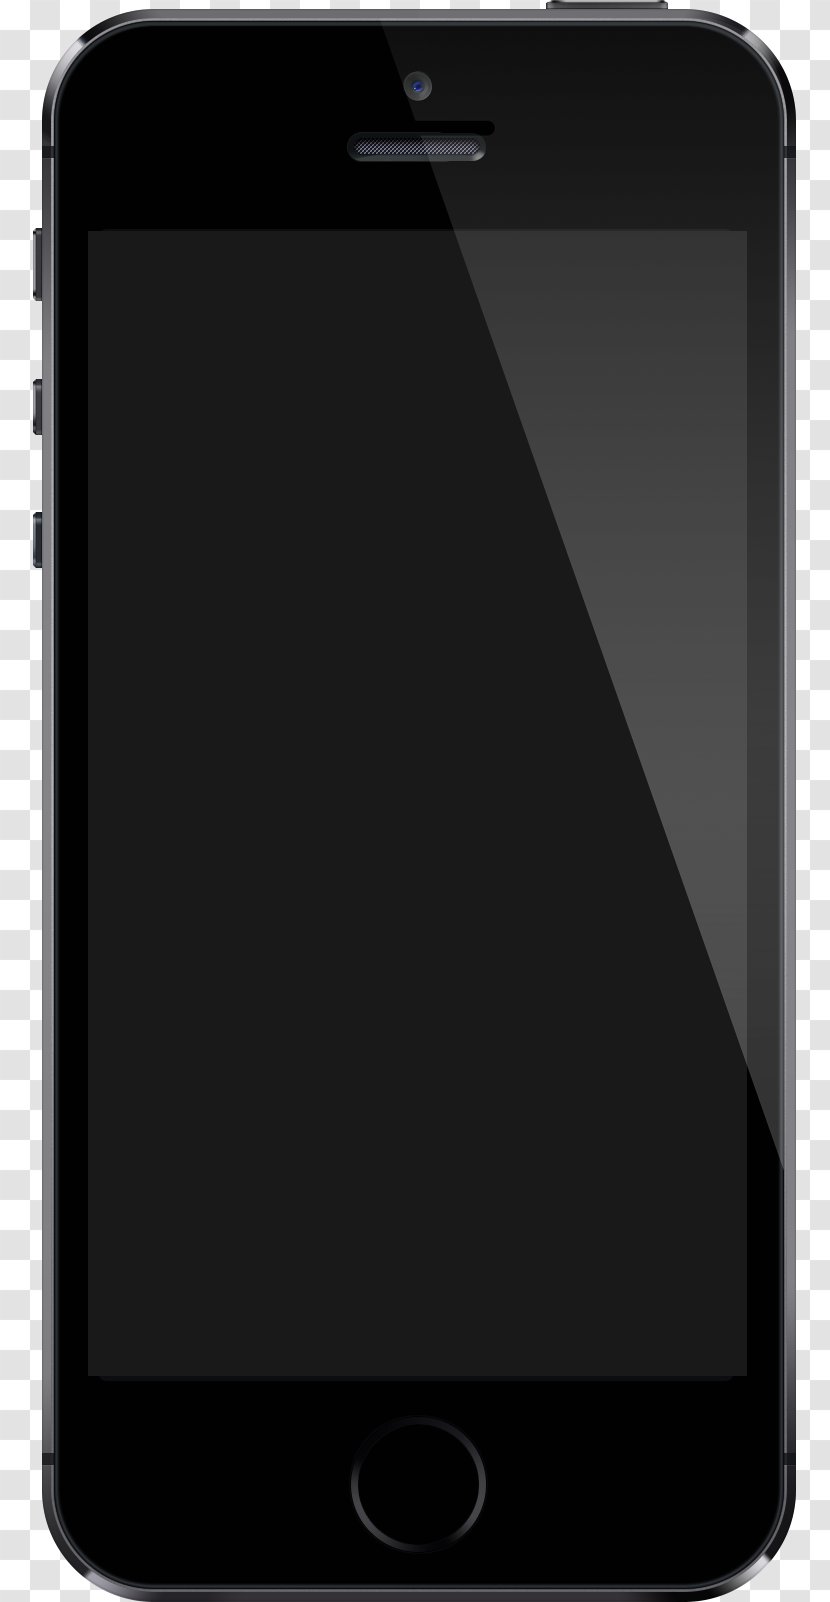 IPhone 5s 3GS Apple - Technology - I Phone Transparent PNG